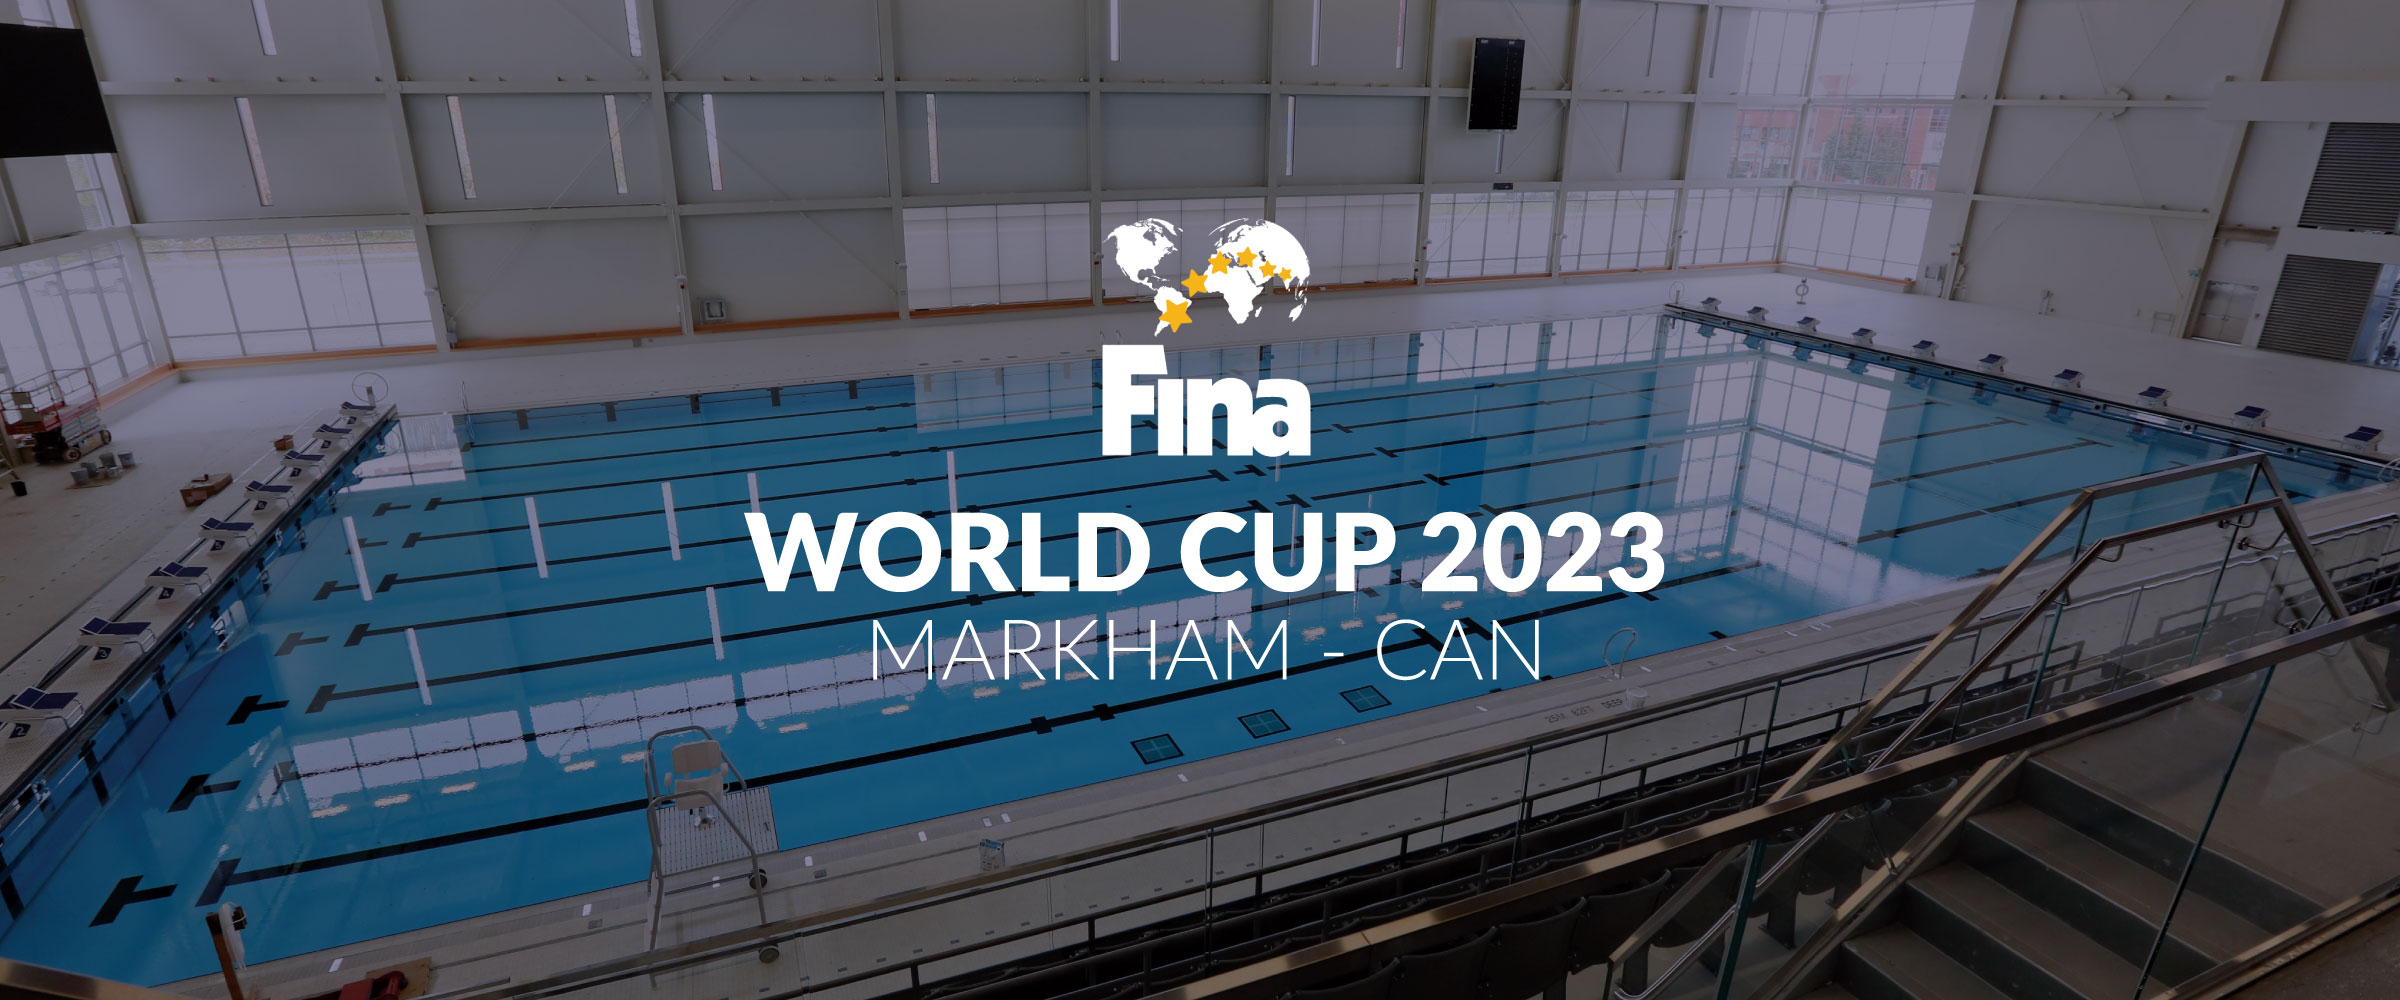 Canada to host 2023 FINA Artistic Swimming World Cup in Markham, Ontario